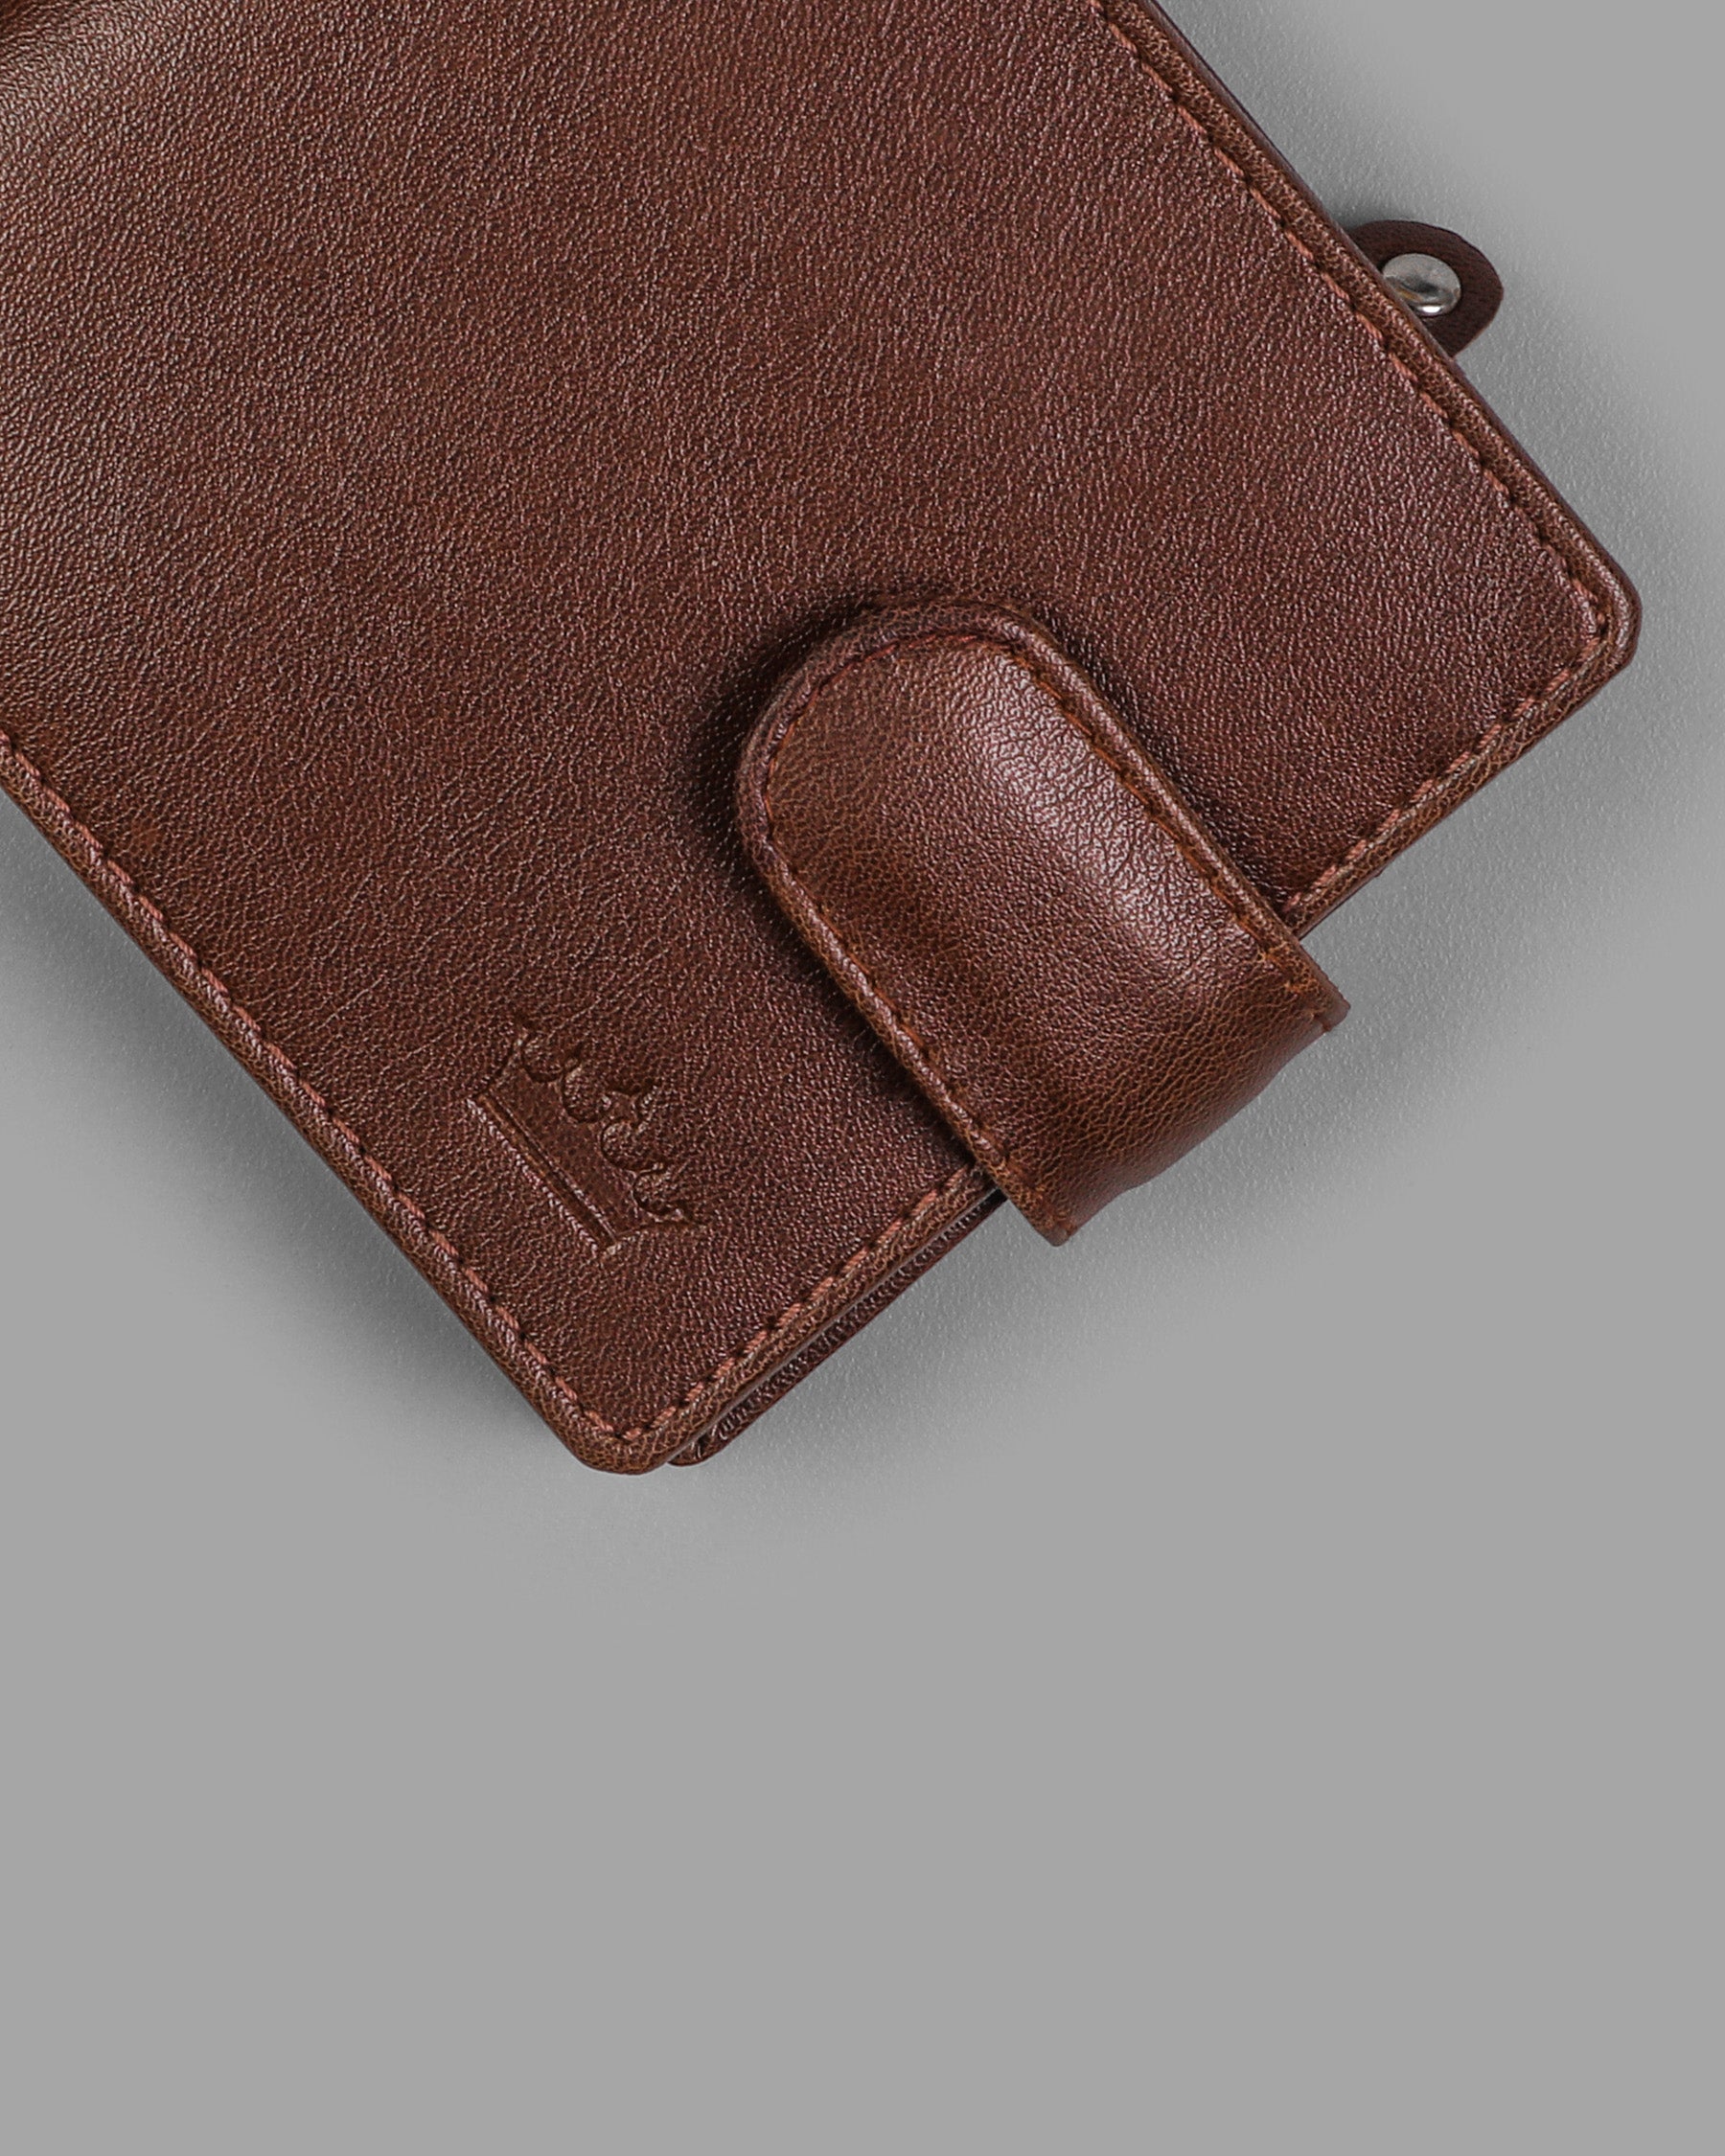 Pack Of 1 Tan Wallet And 1 With Brown Belt